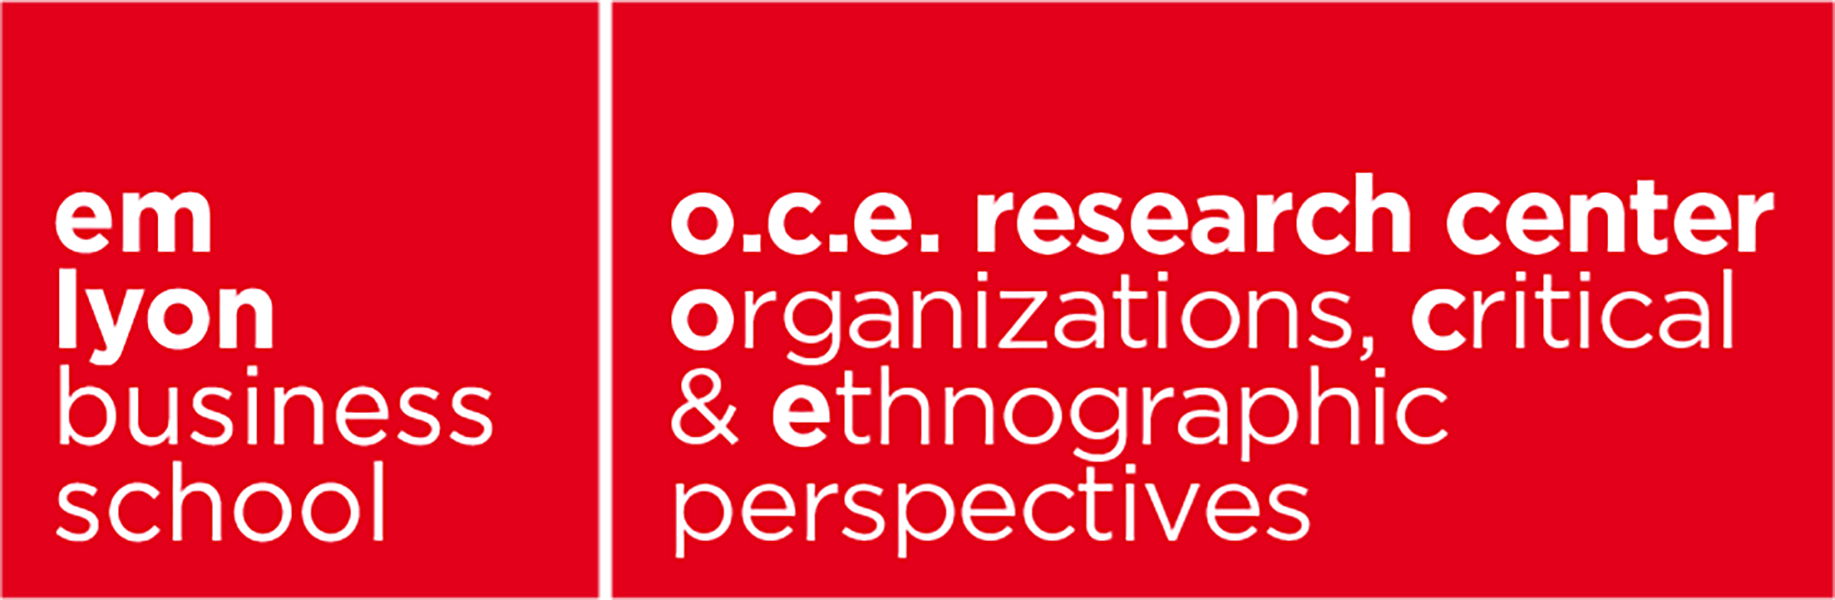 OCE Research Center